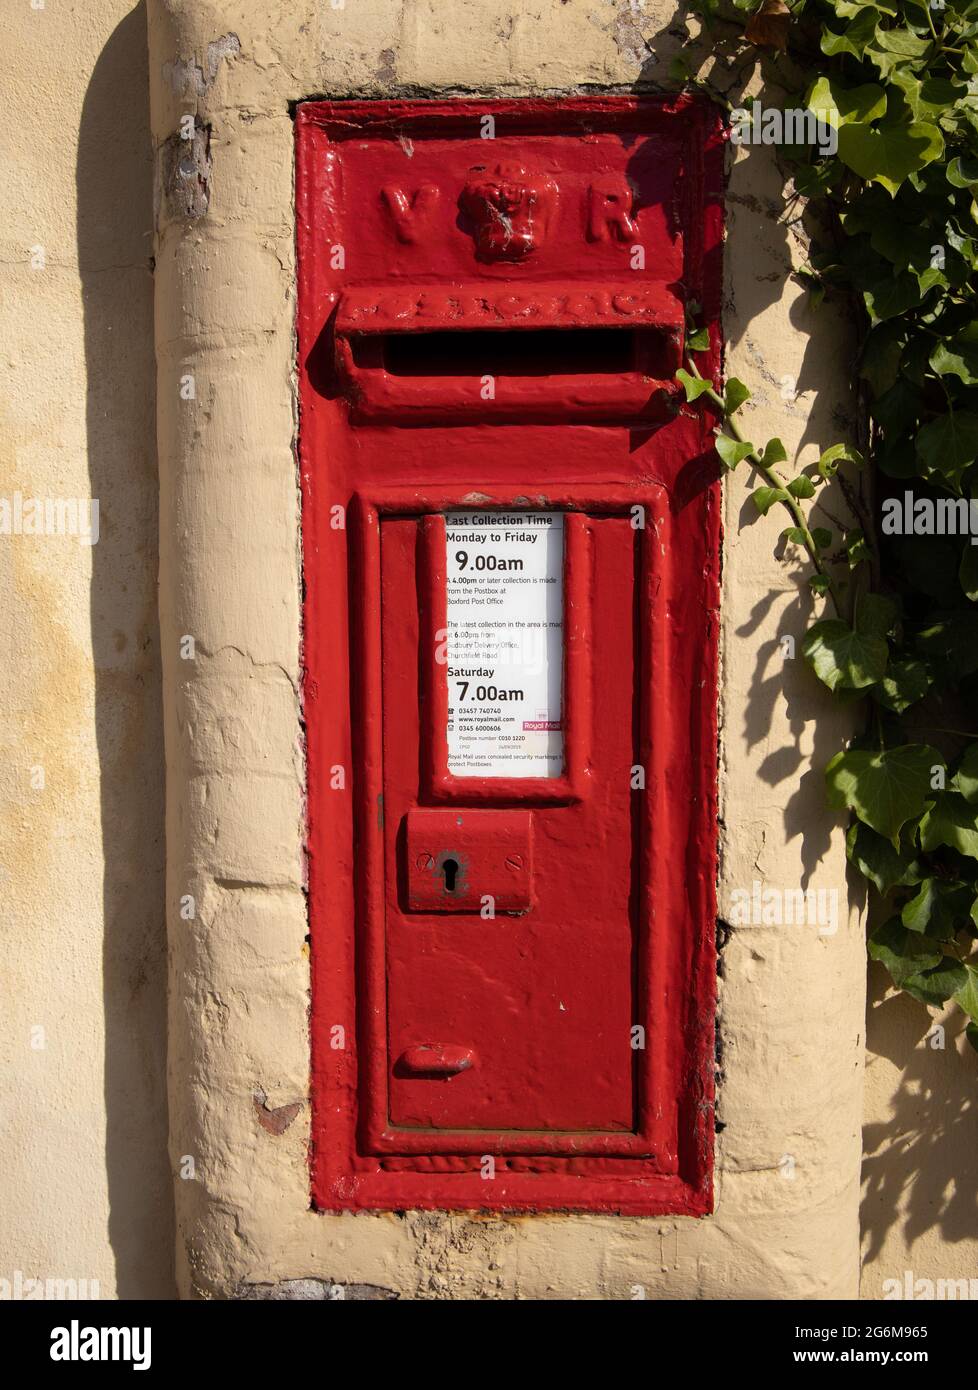 Red letter box built into a wall showing collection times England Stock Photo